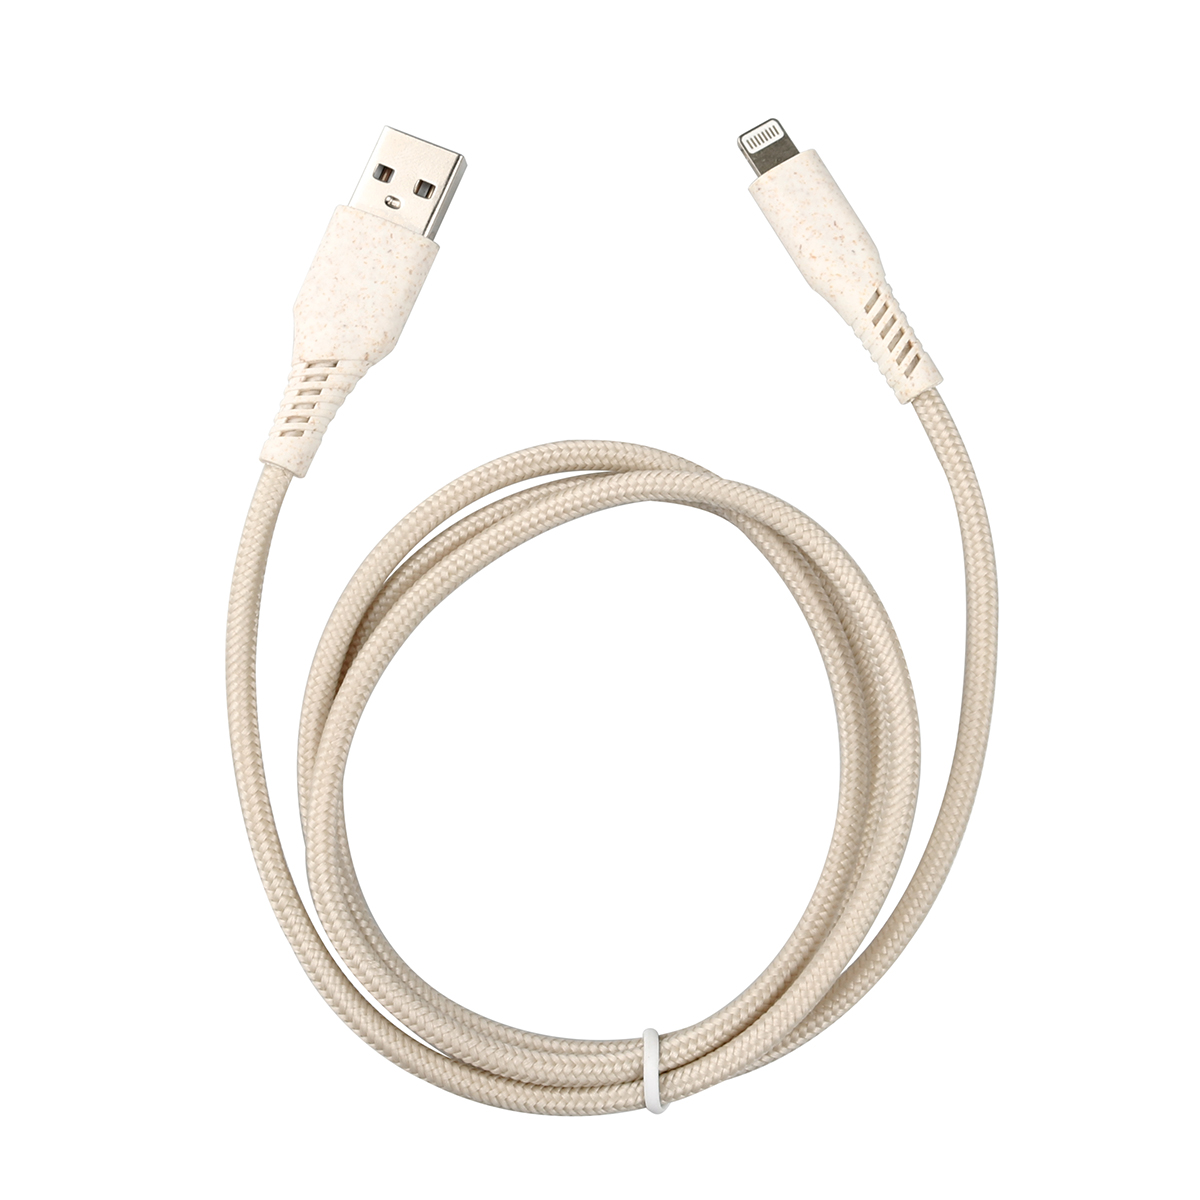 Eco Straw wheat Lighting 8 pin data cable 1m Type-c Android Connector